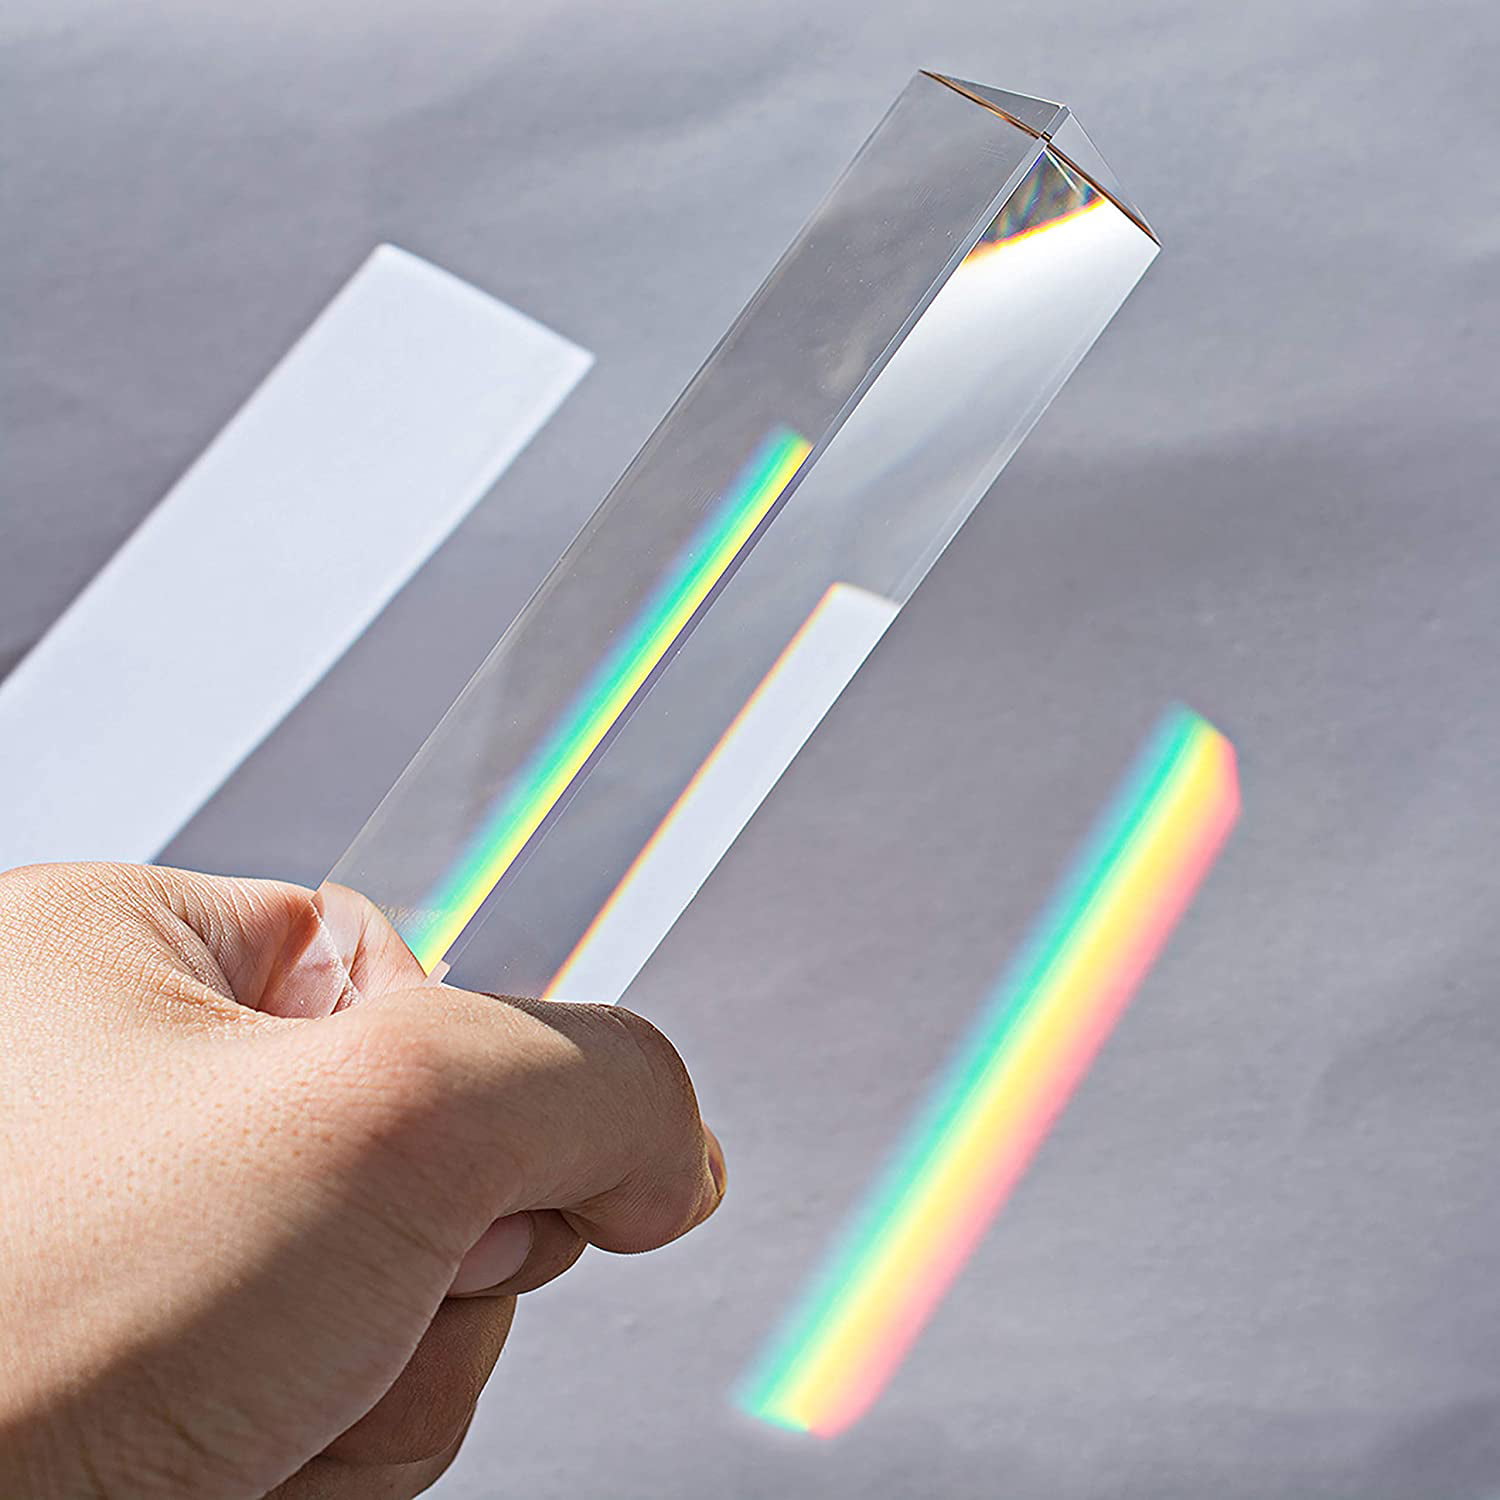 LINYY Optical Glass Triangular Prism 6 Inches Crystal Rainbow Maker for Photography Science Experiments Physics Teaching Light Spectrum 